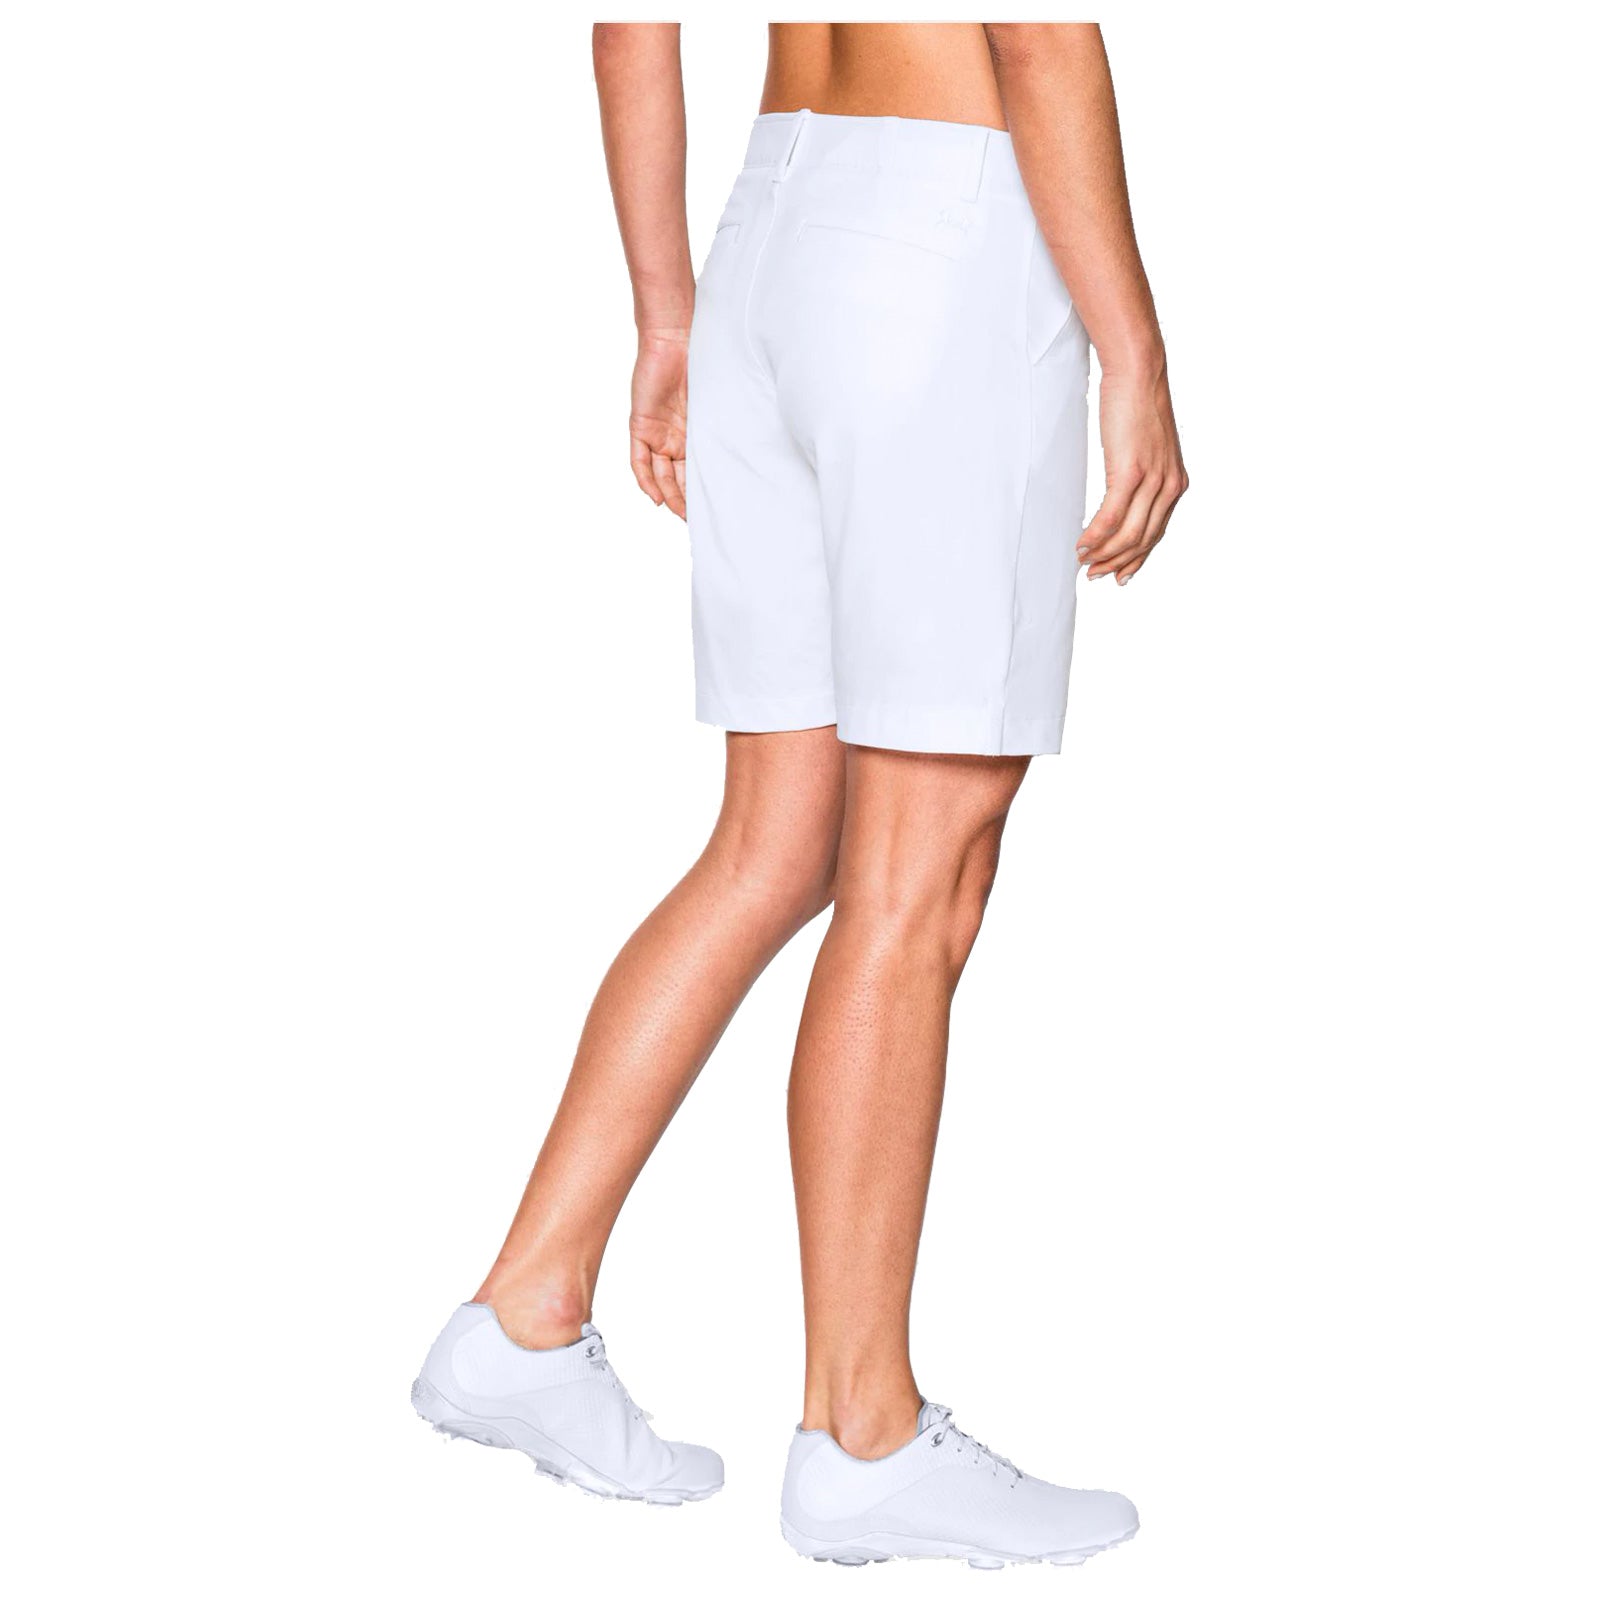 Under Armour Ladies Links Shorts